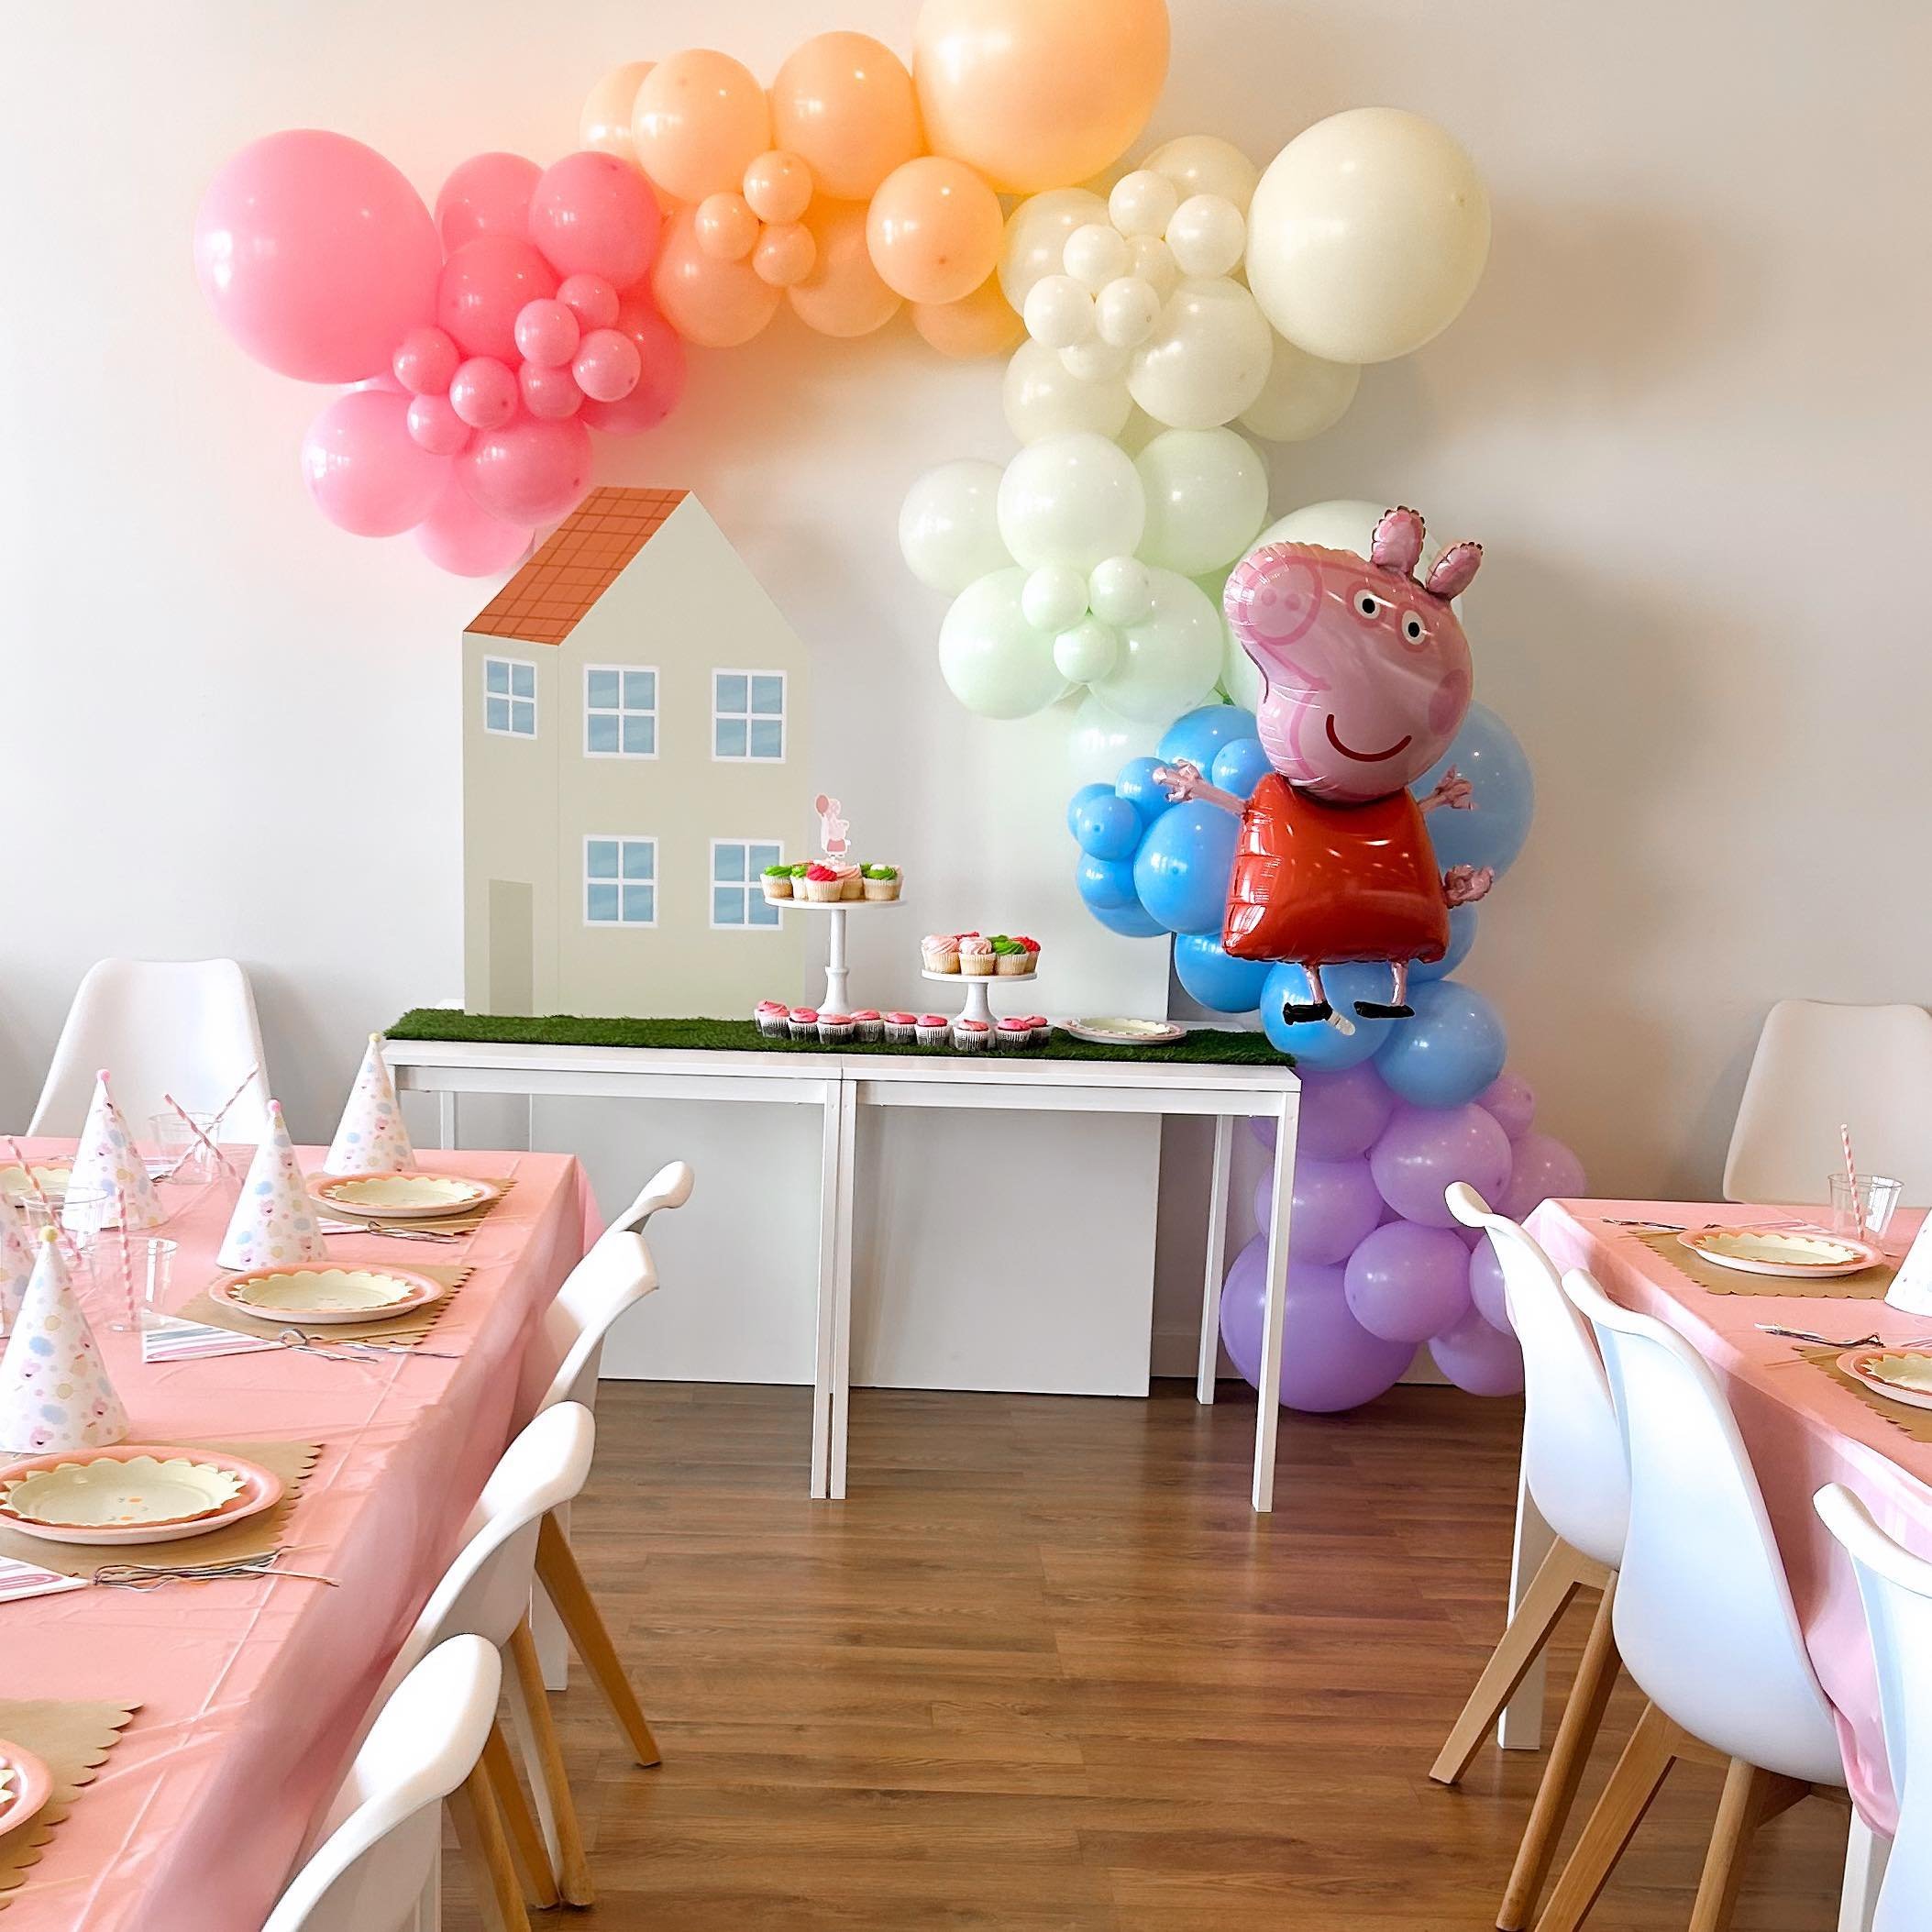 We love helping host your party! Choose from our range of packages, from DIY to walk-in ready, Book now and let the birthday fun begin!

www.mikosplay.com/party

#mikosplayhouse #playcafe #lafayettela #party #kidspartieslafayette